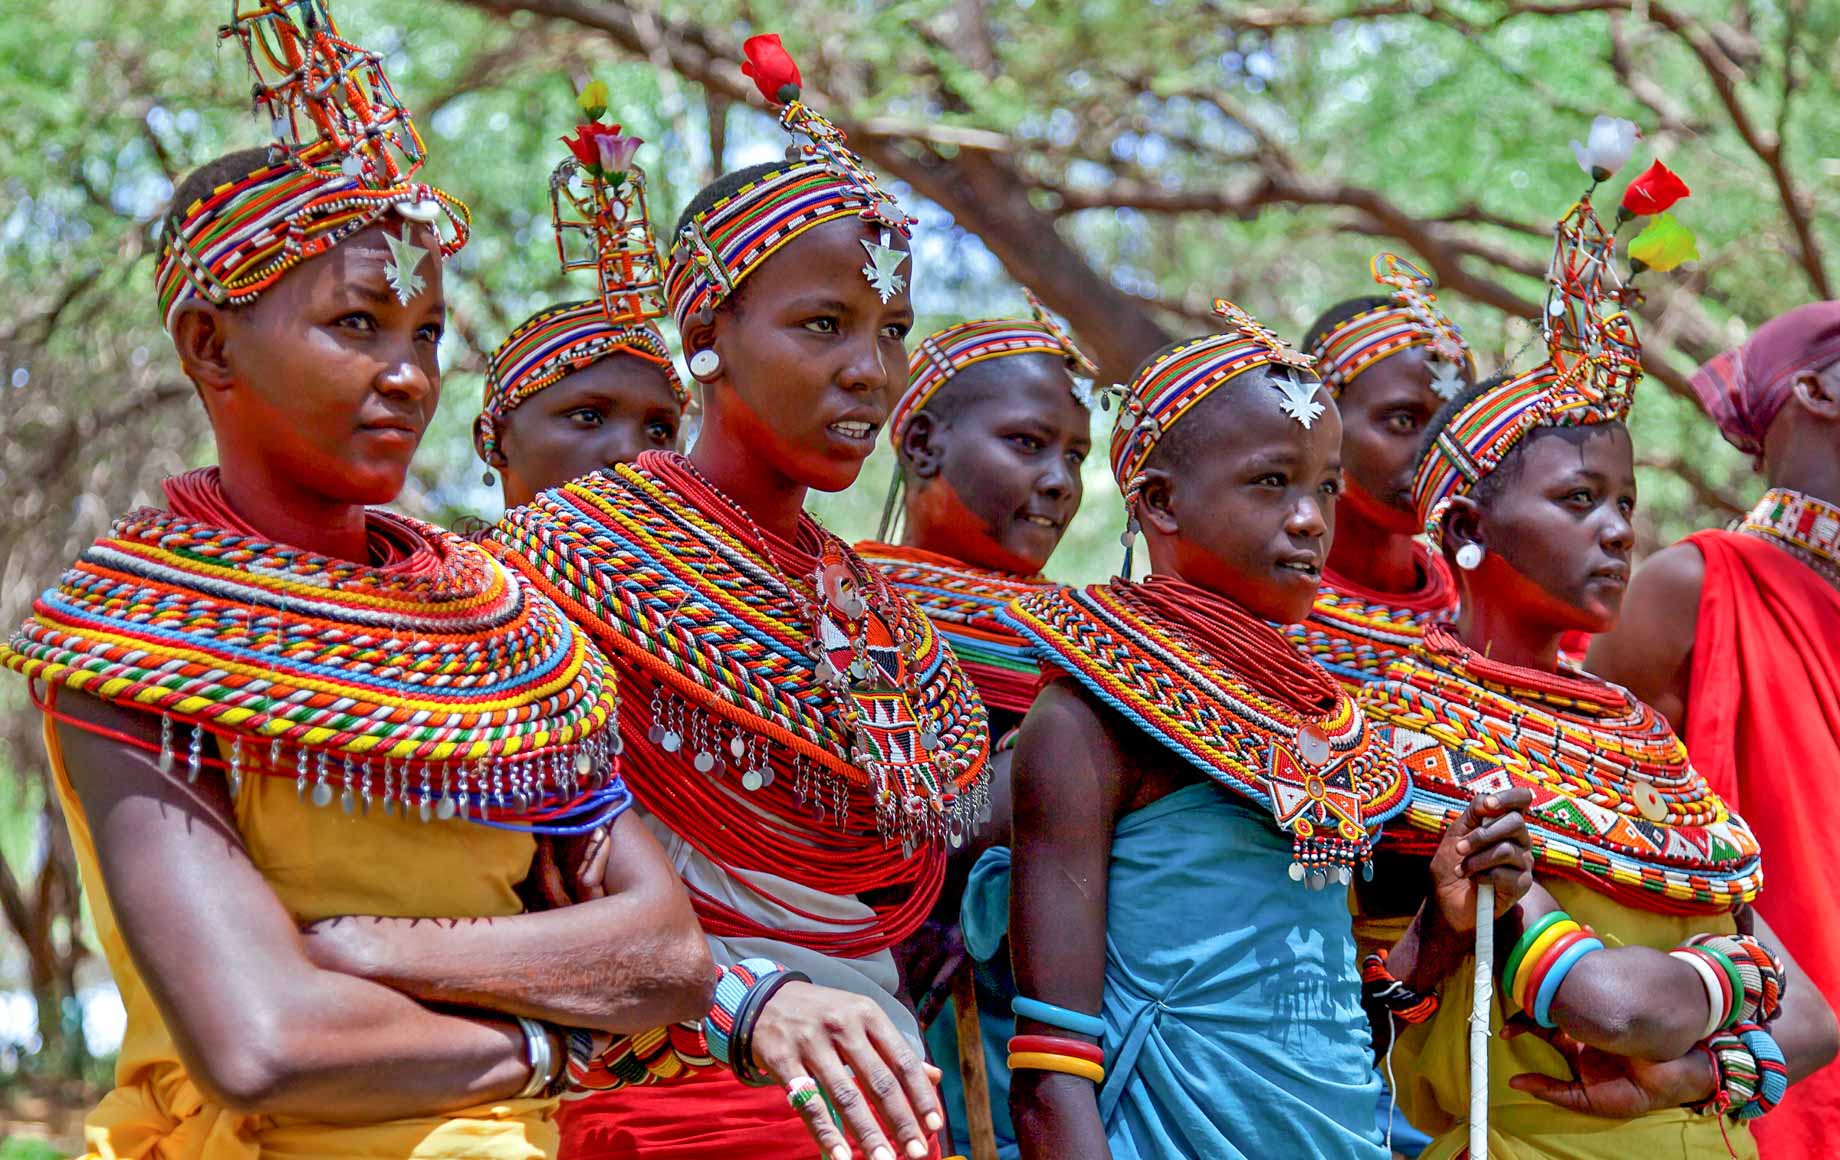 Members with bright, colorful clothing and accessories at Samburu National Reserve